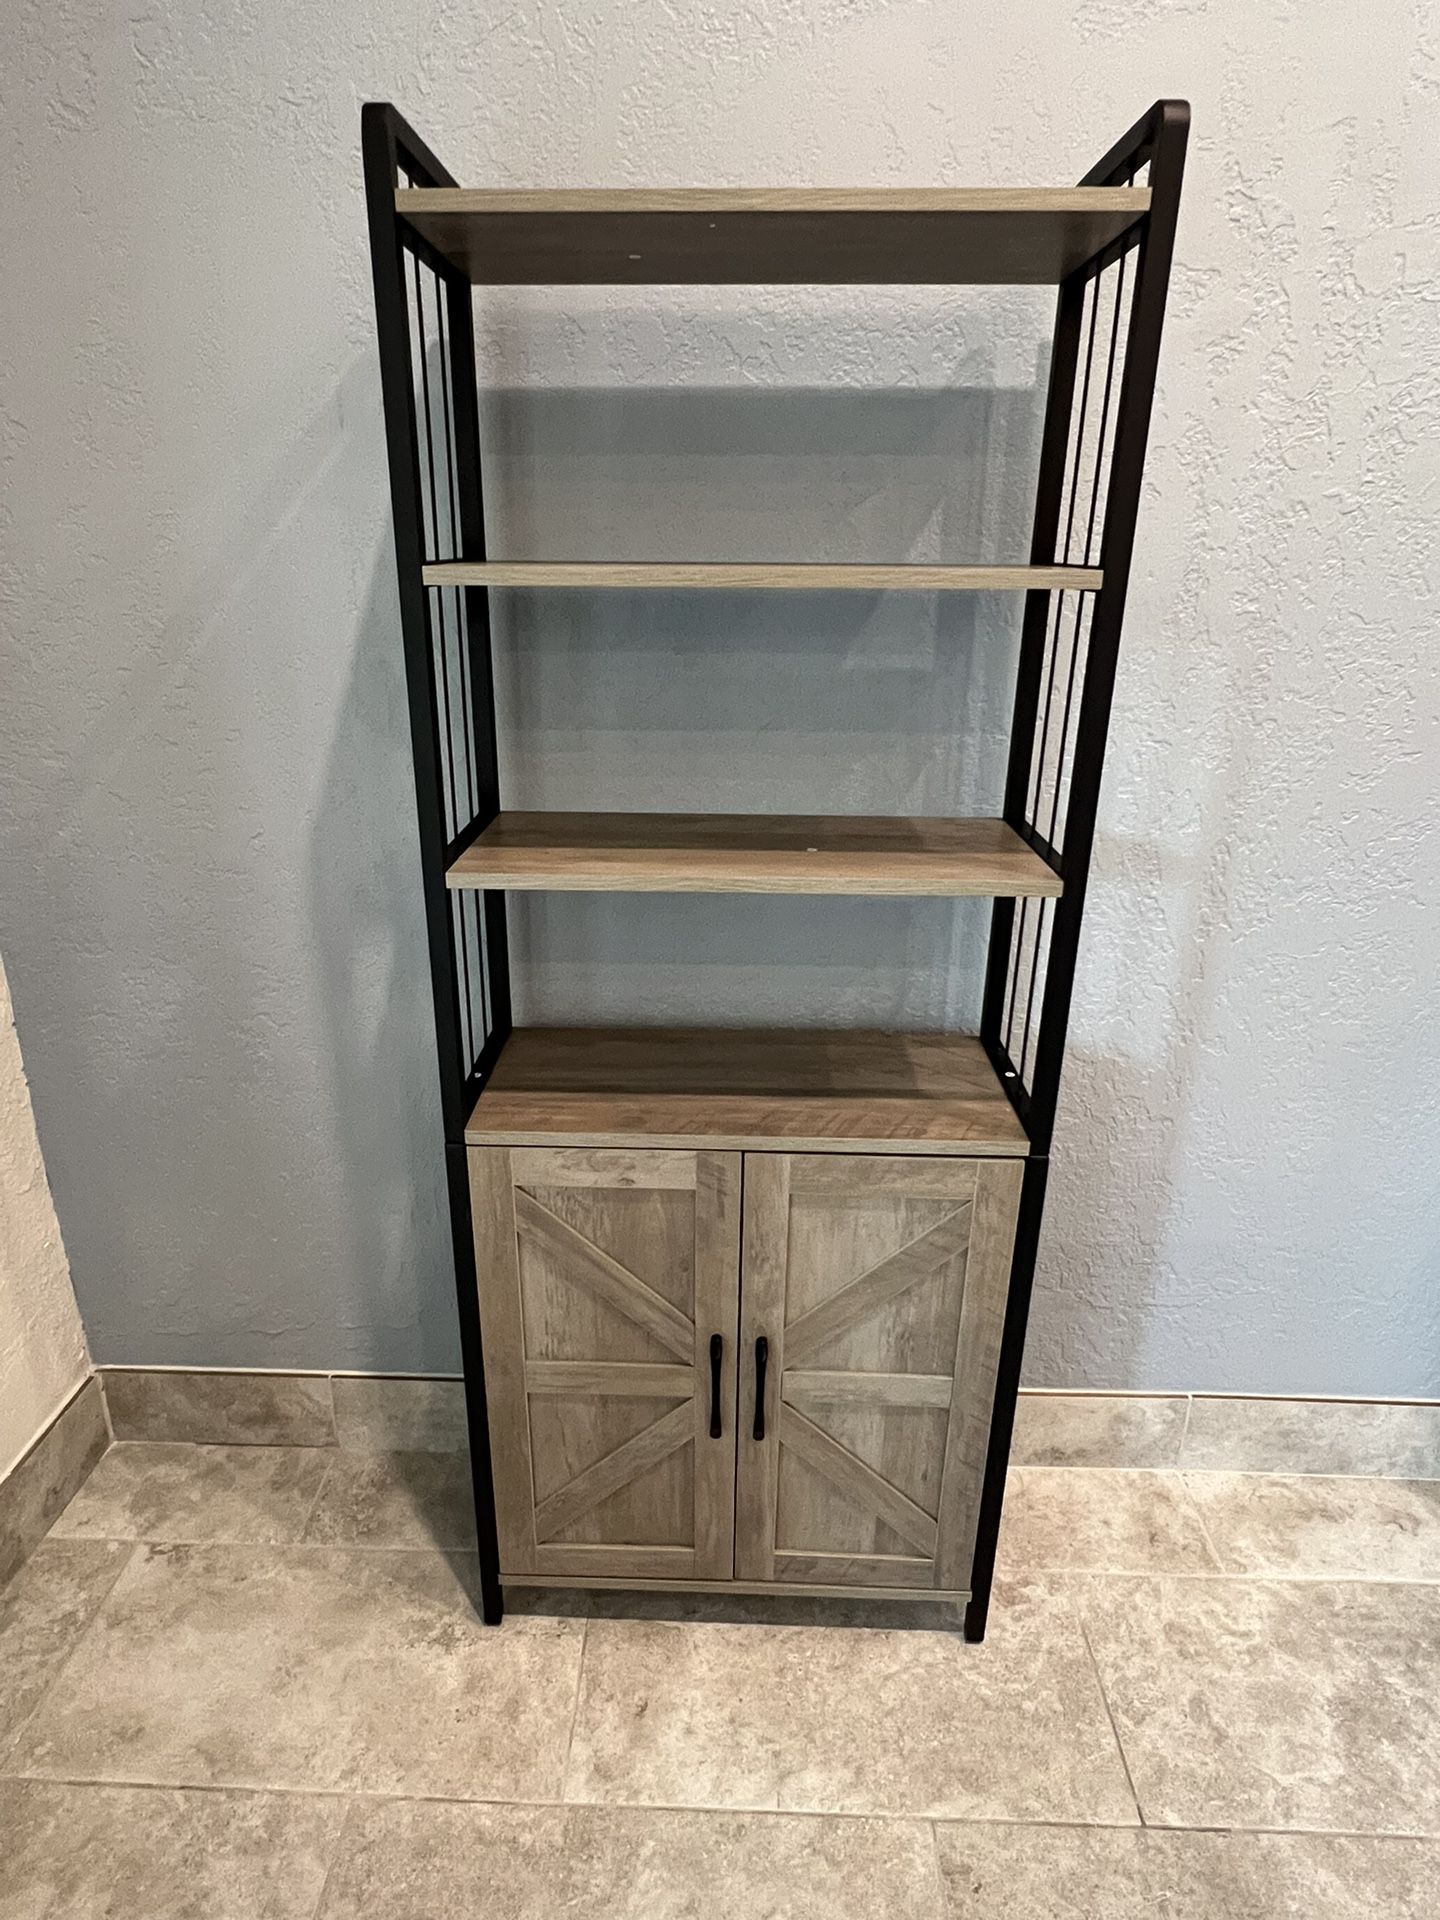 NEW - Bookshelf / Bookcase / Shelf Unit with Cabinet  - Grey faux wood with Black accents